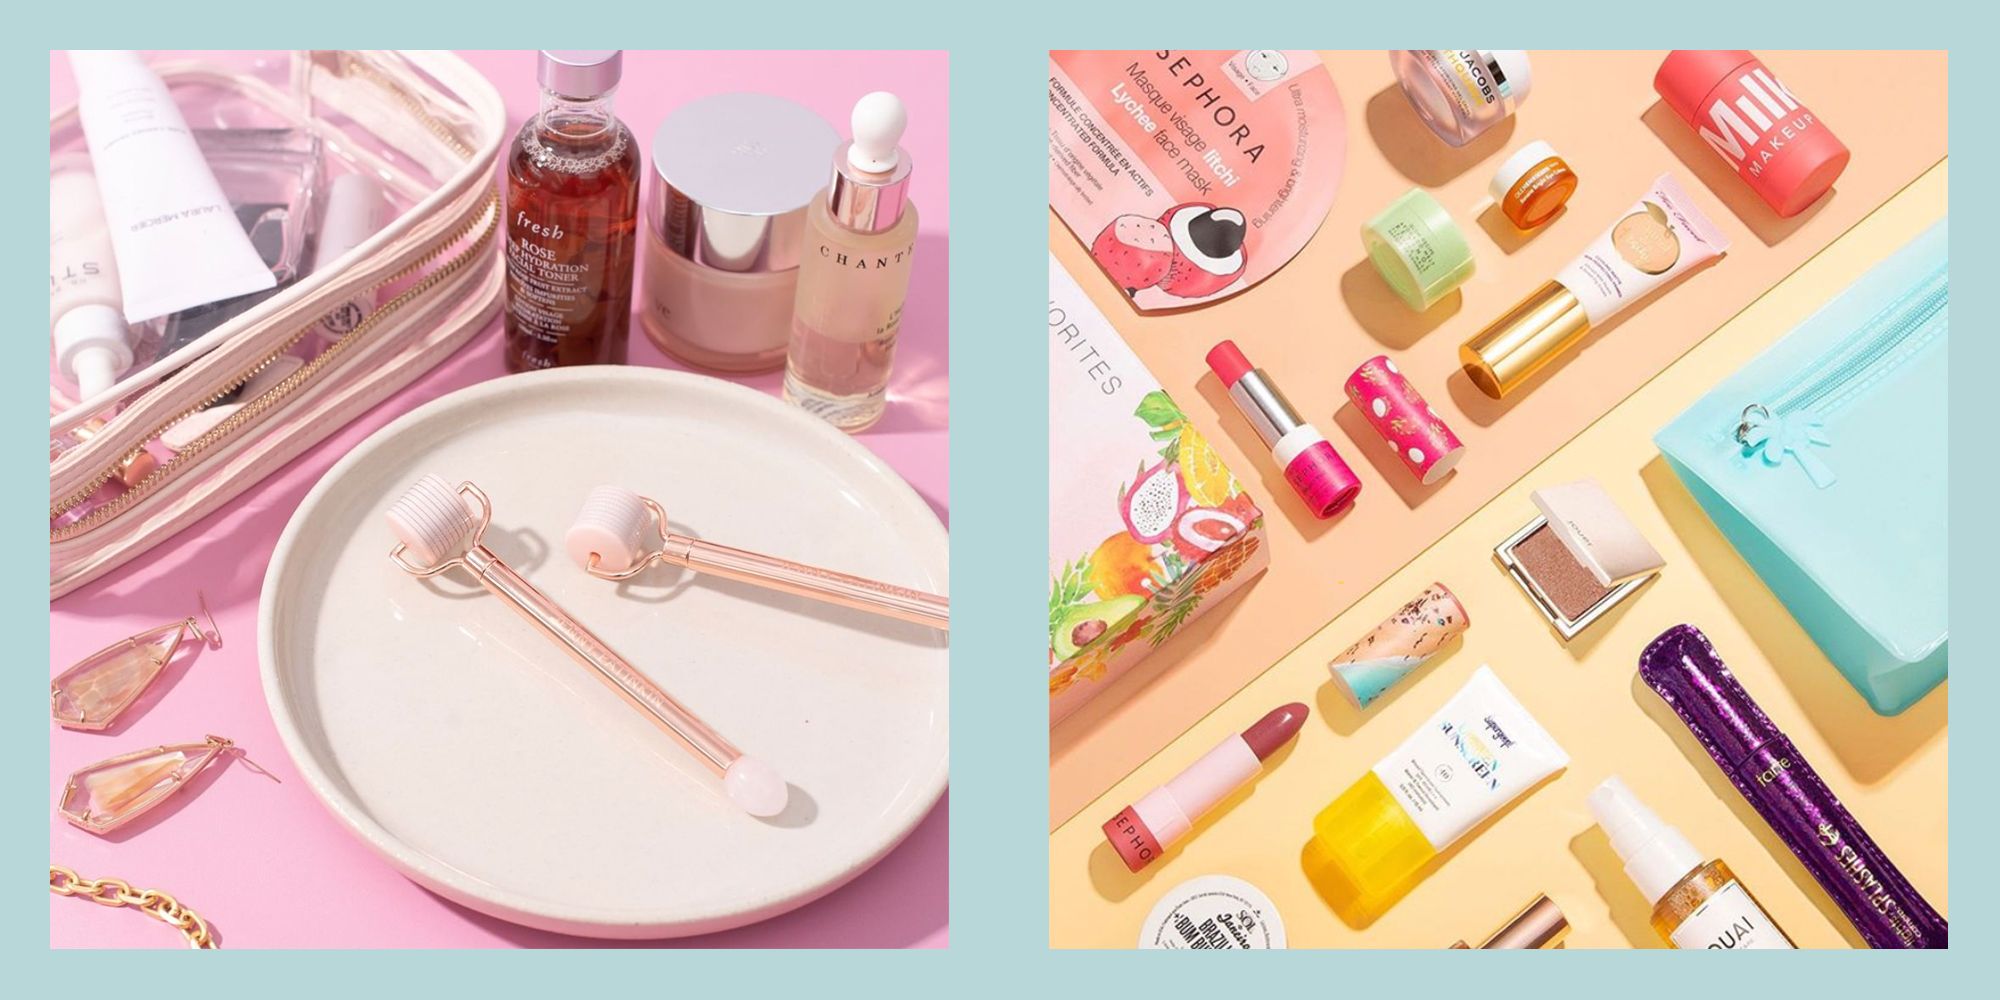 10 Best Online Beauty Stores 2022 - Makeup and Skincare Shops Online